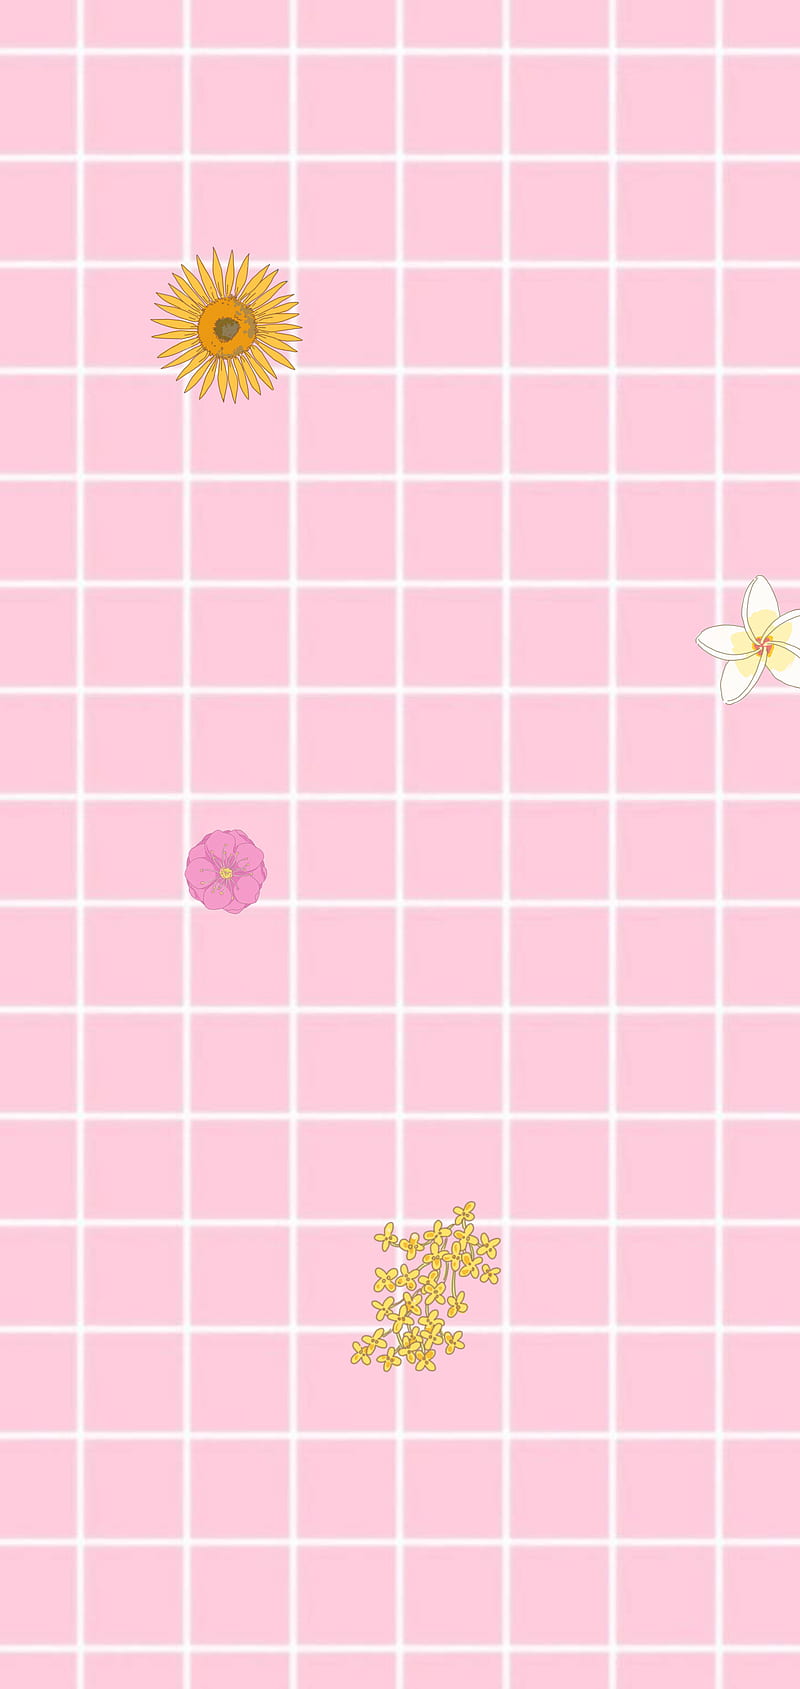 Aesthetic wallpaper for phone background, pink grid background with small flowers - Soft pink